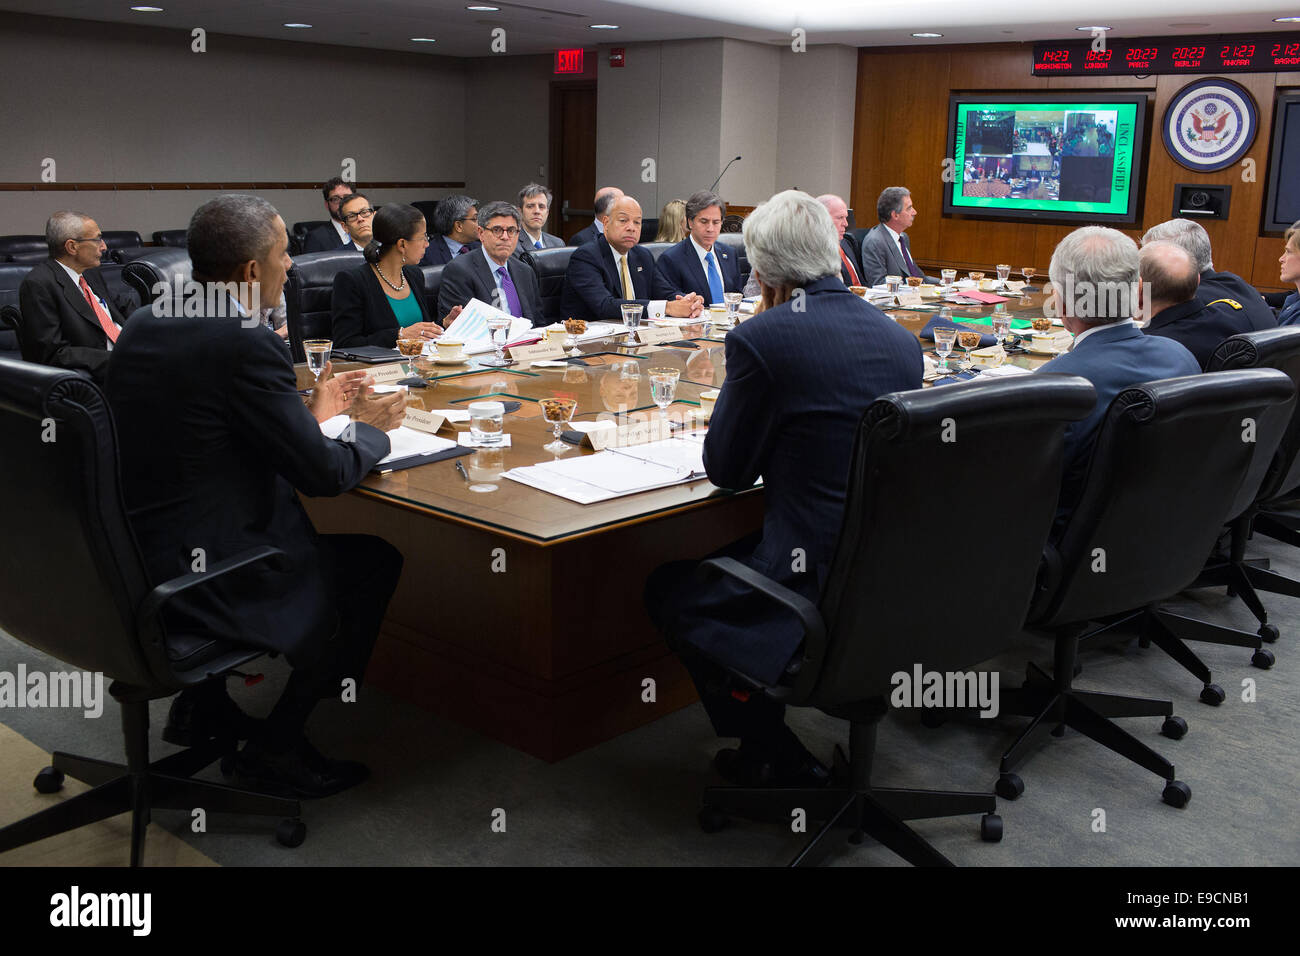 US President Barack Obama, with Secretary of State John Kerry and other cabinet members, participates in a secure video teleconference with the U.S. Embassy Baghdad and Consulates General in Erbil and Basrah, at the Department of State October 24, 2014 in Washington, DC. Stock Photo